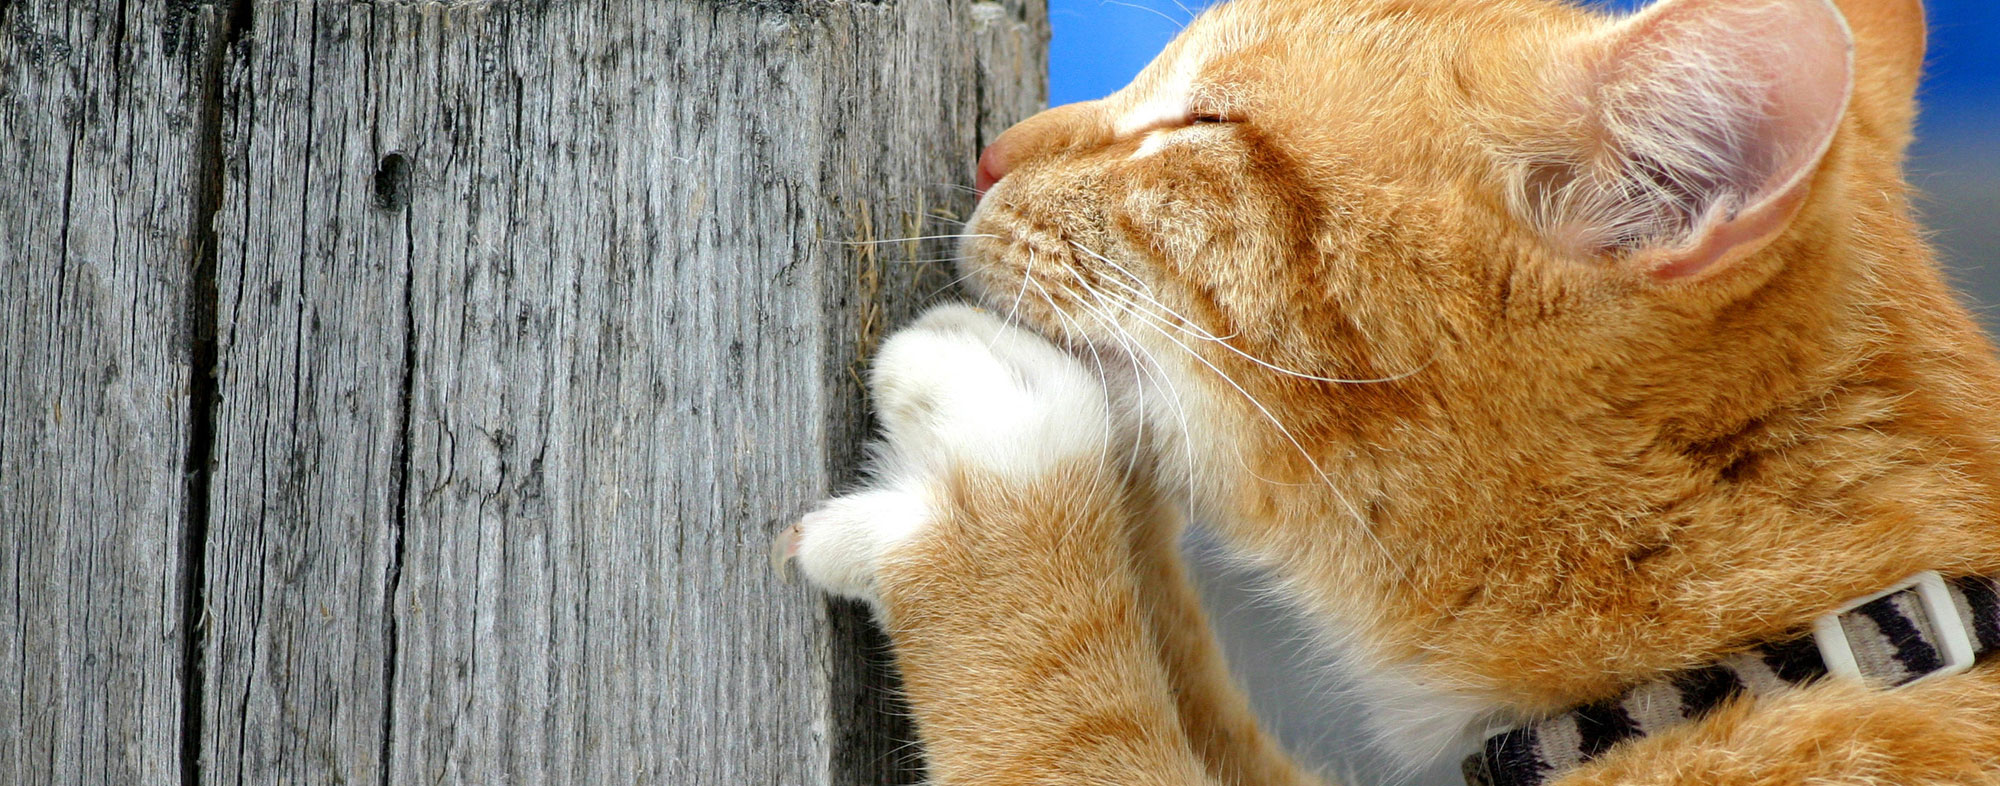 An orange cat that has been excessively scratching a wooden post